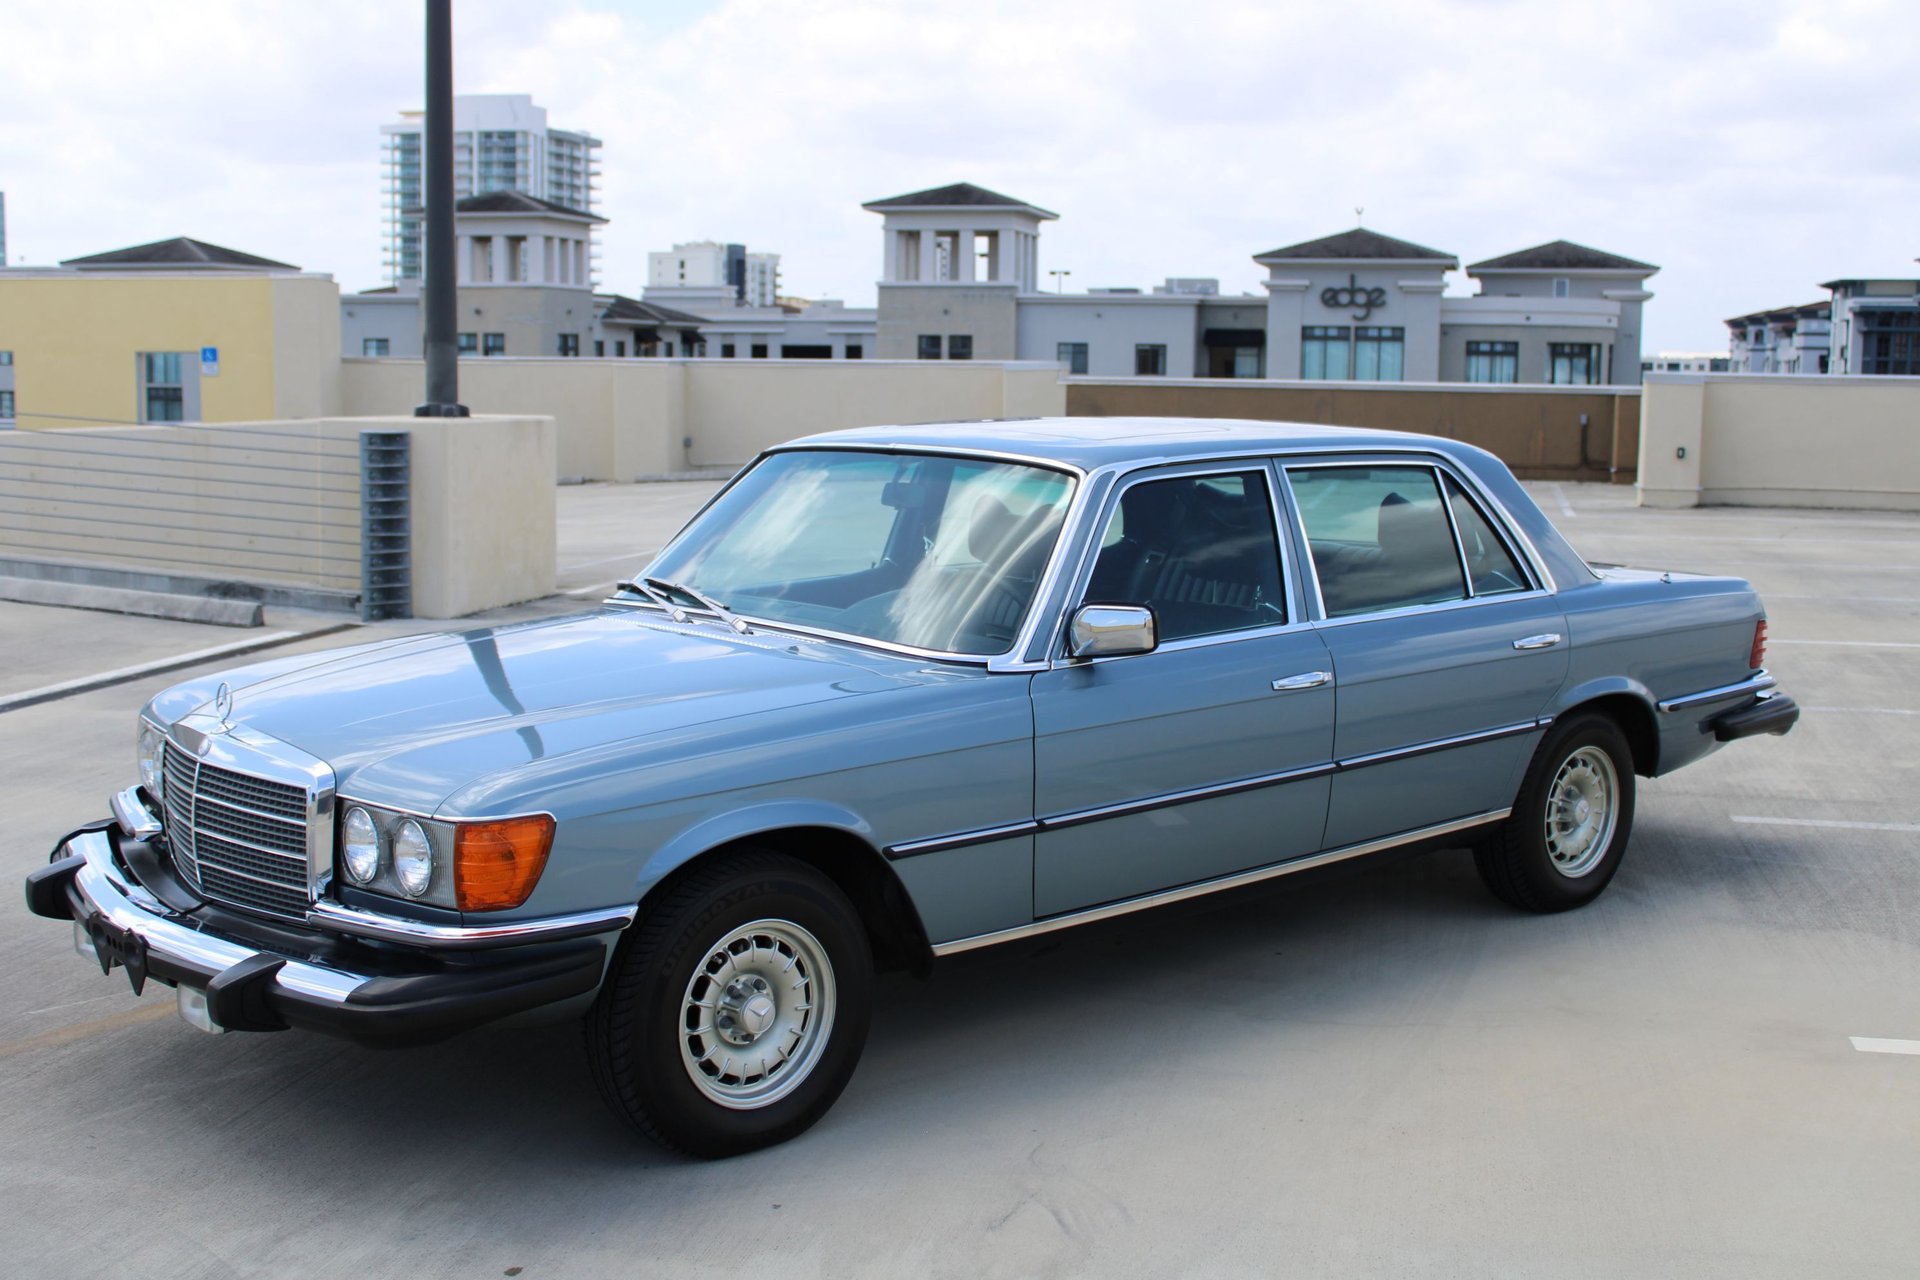 1978 Mercedes-Benz 450 SEL | Motorcar Gallery | Classic Cars For Sale Since  1985